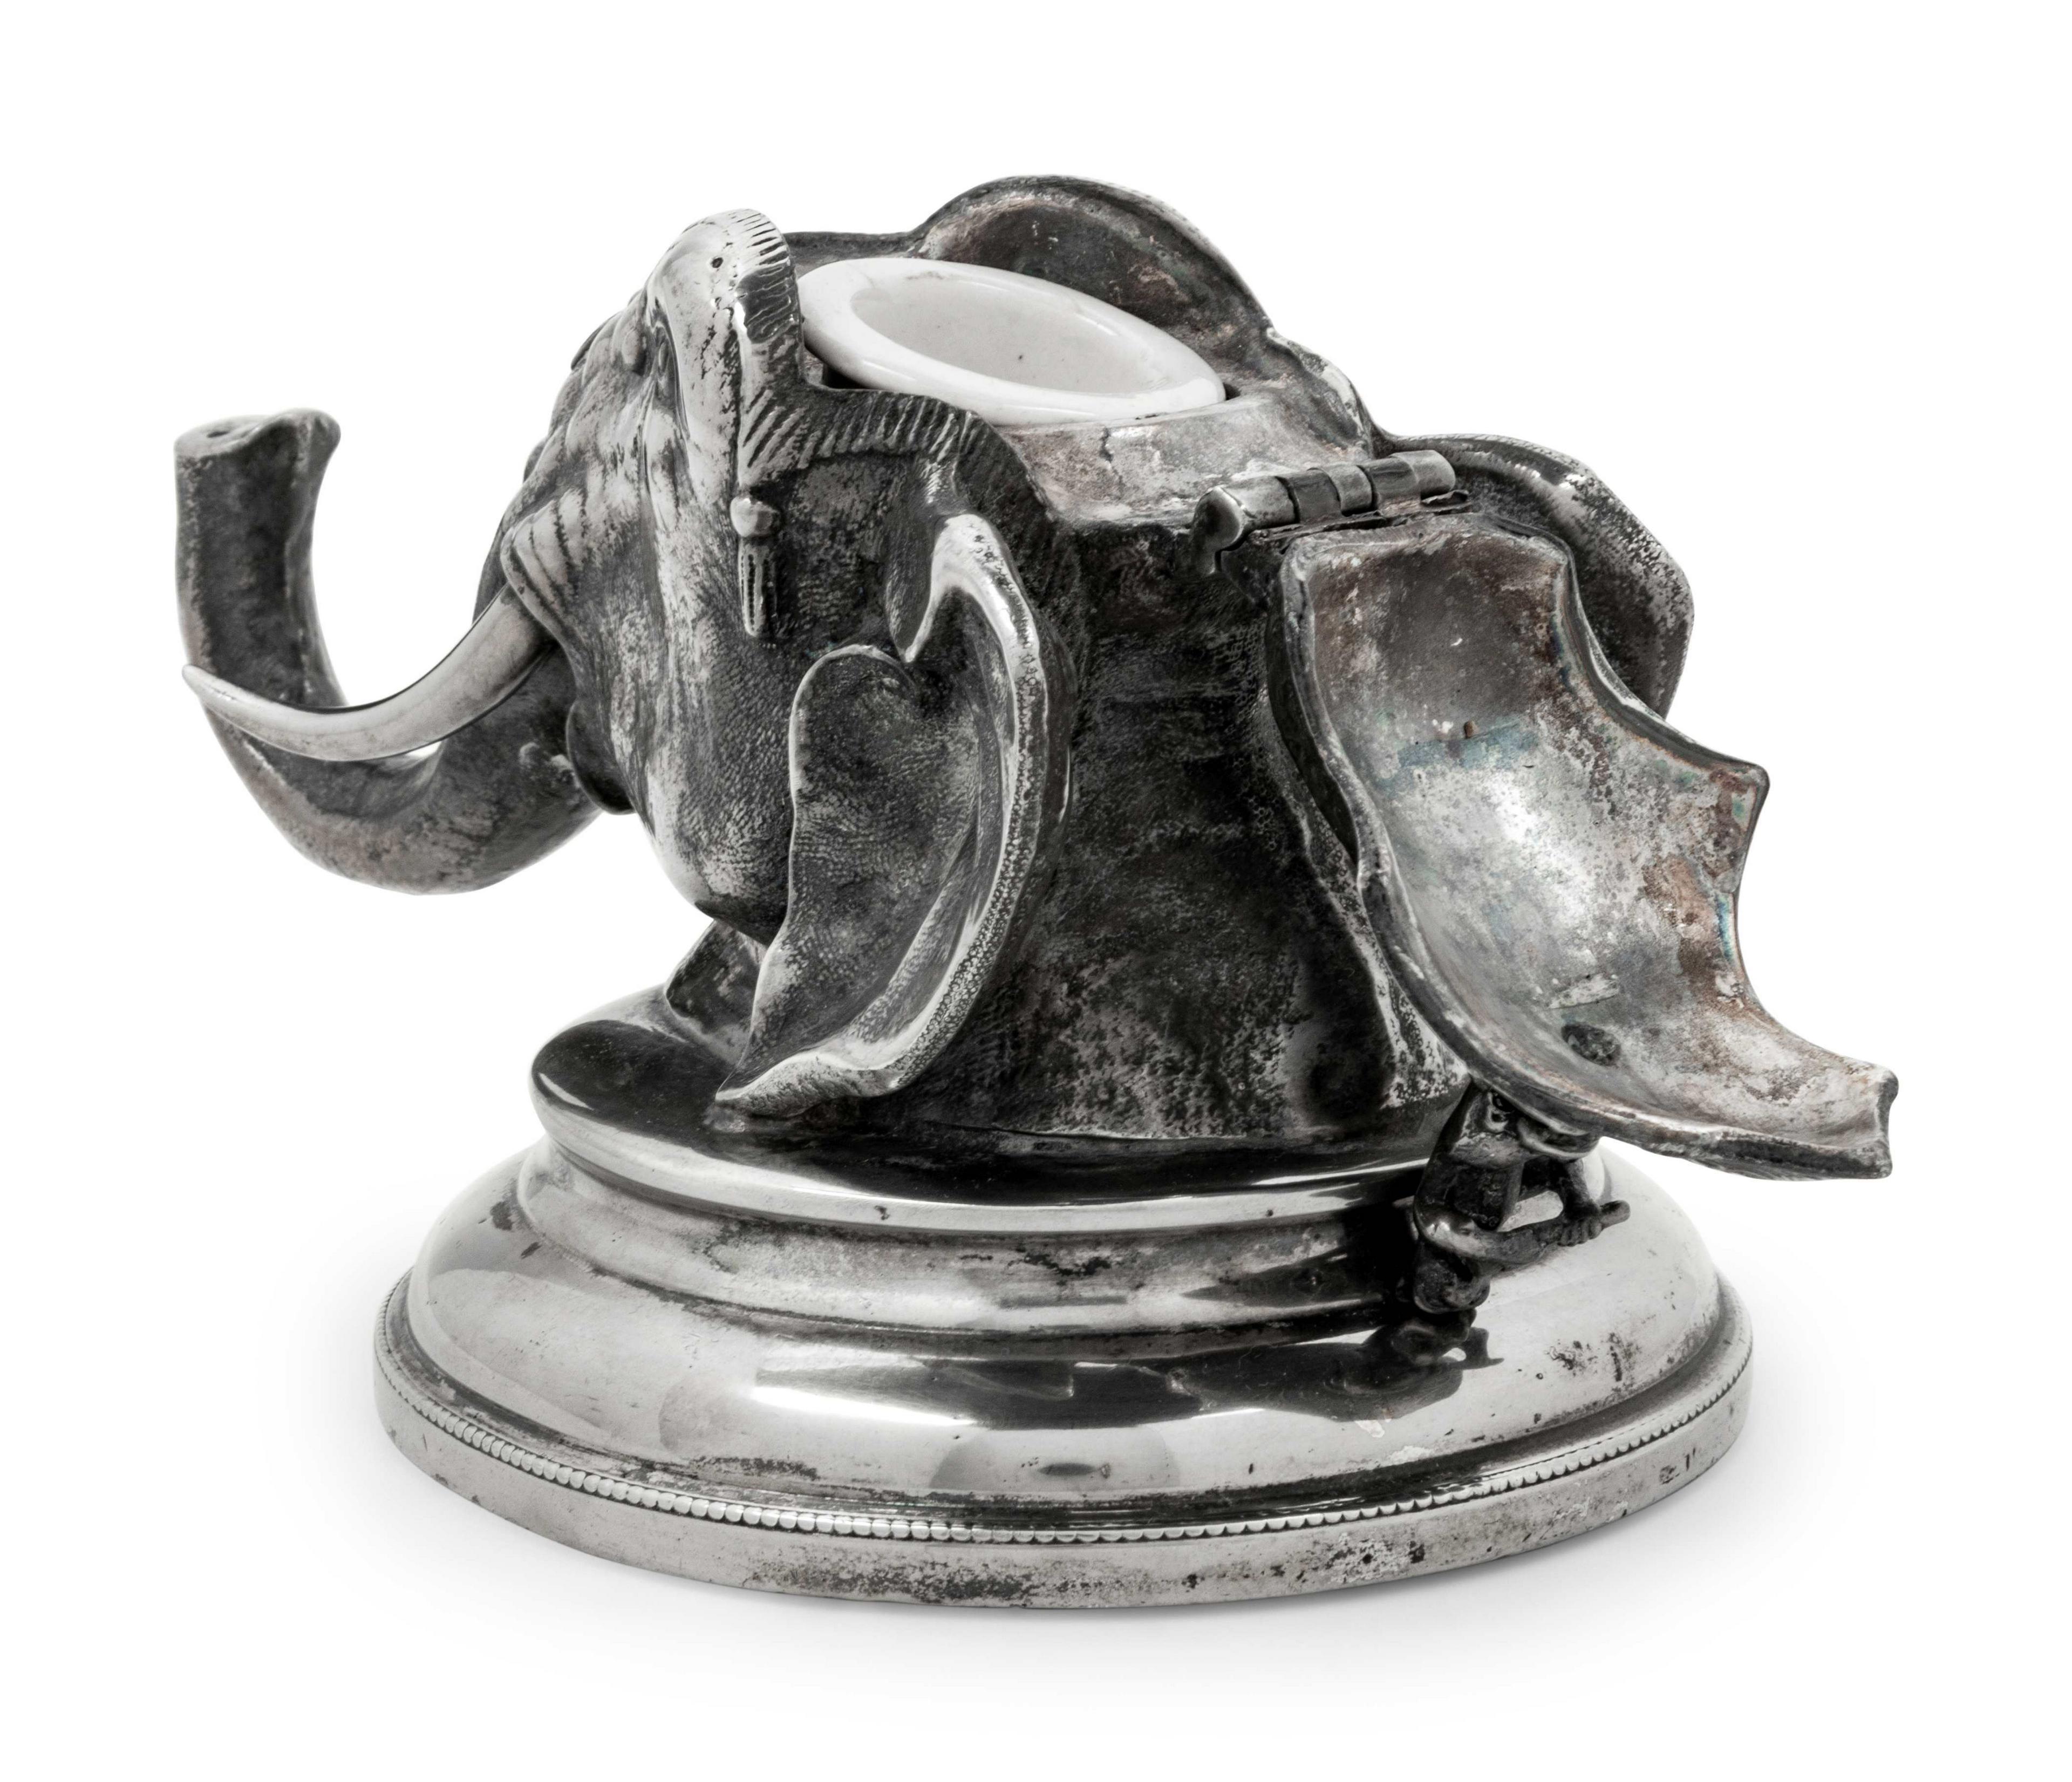 Edwardian English Silver-Plate Zoomorphic Ink Well